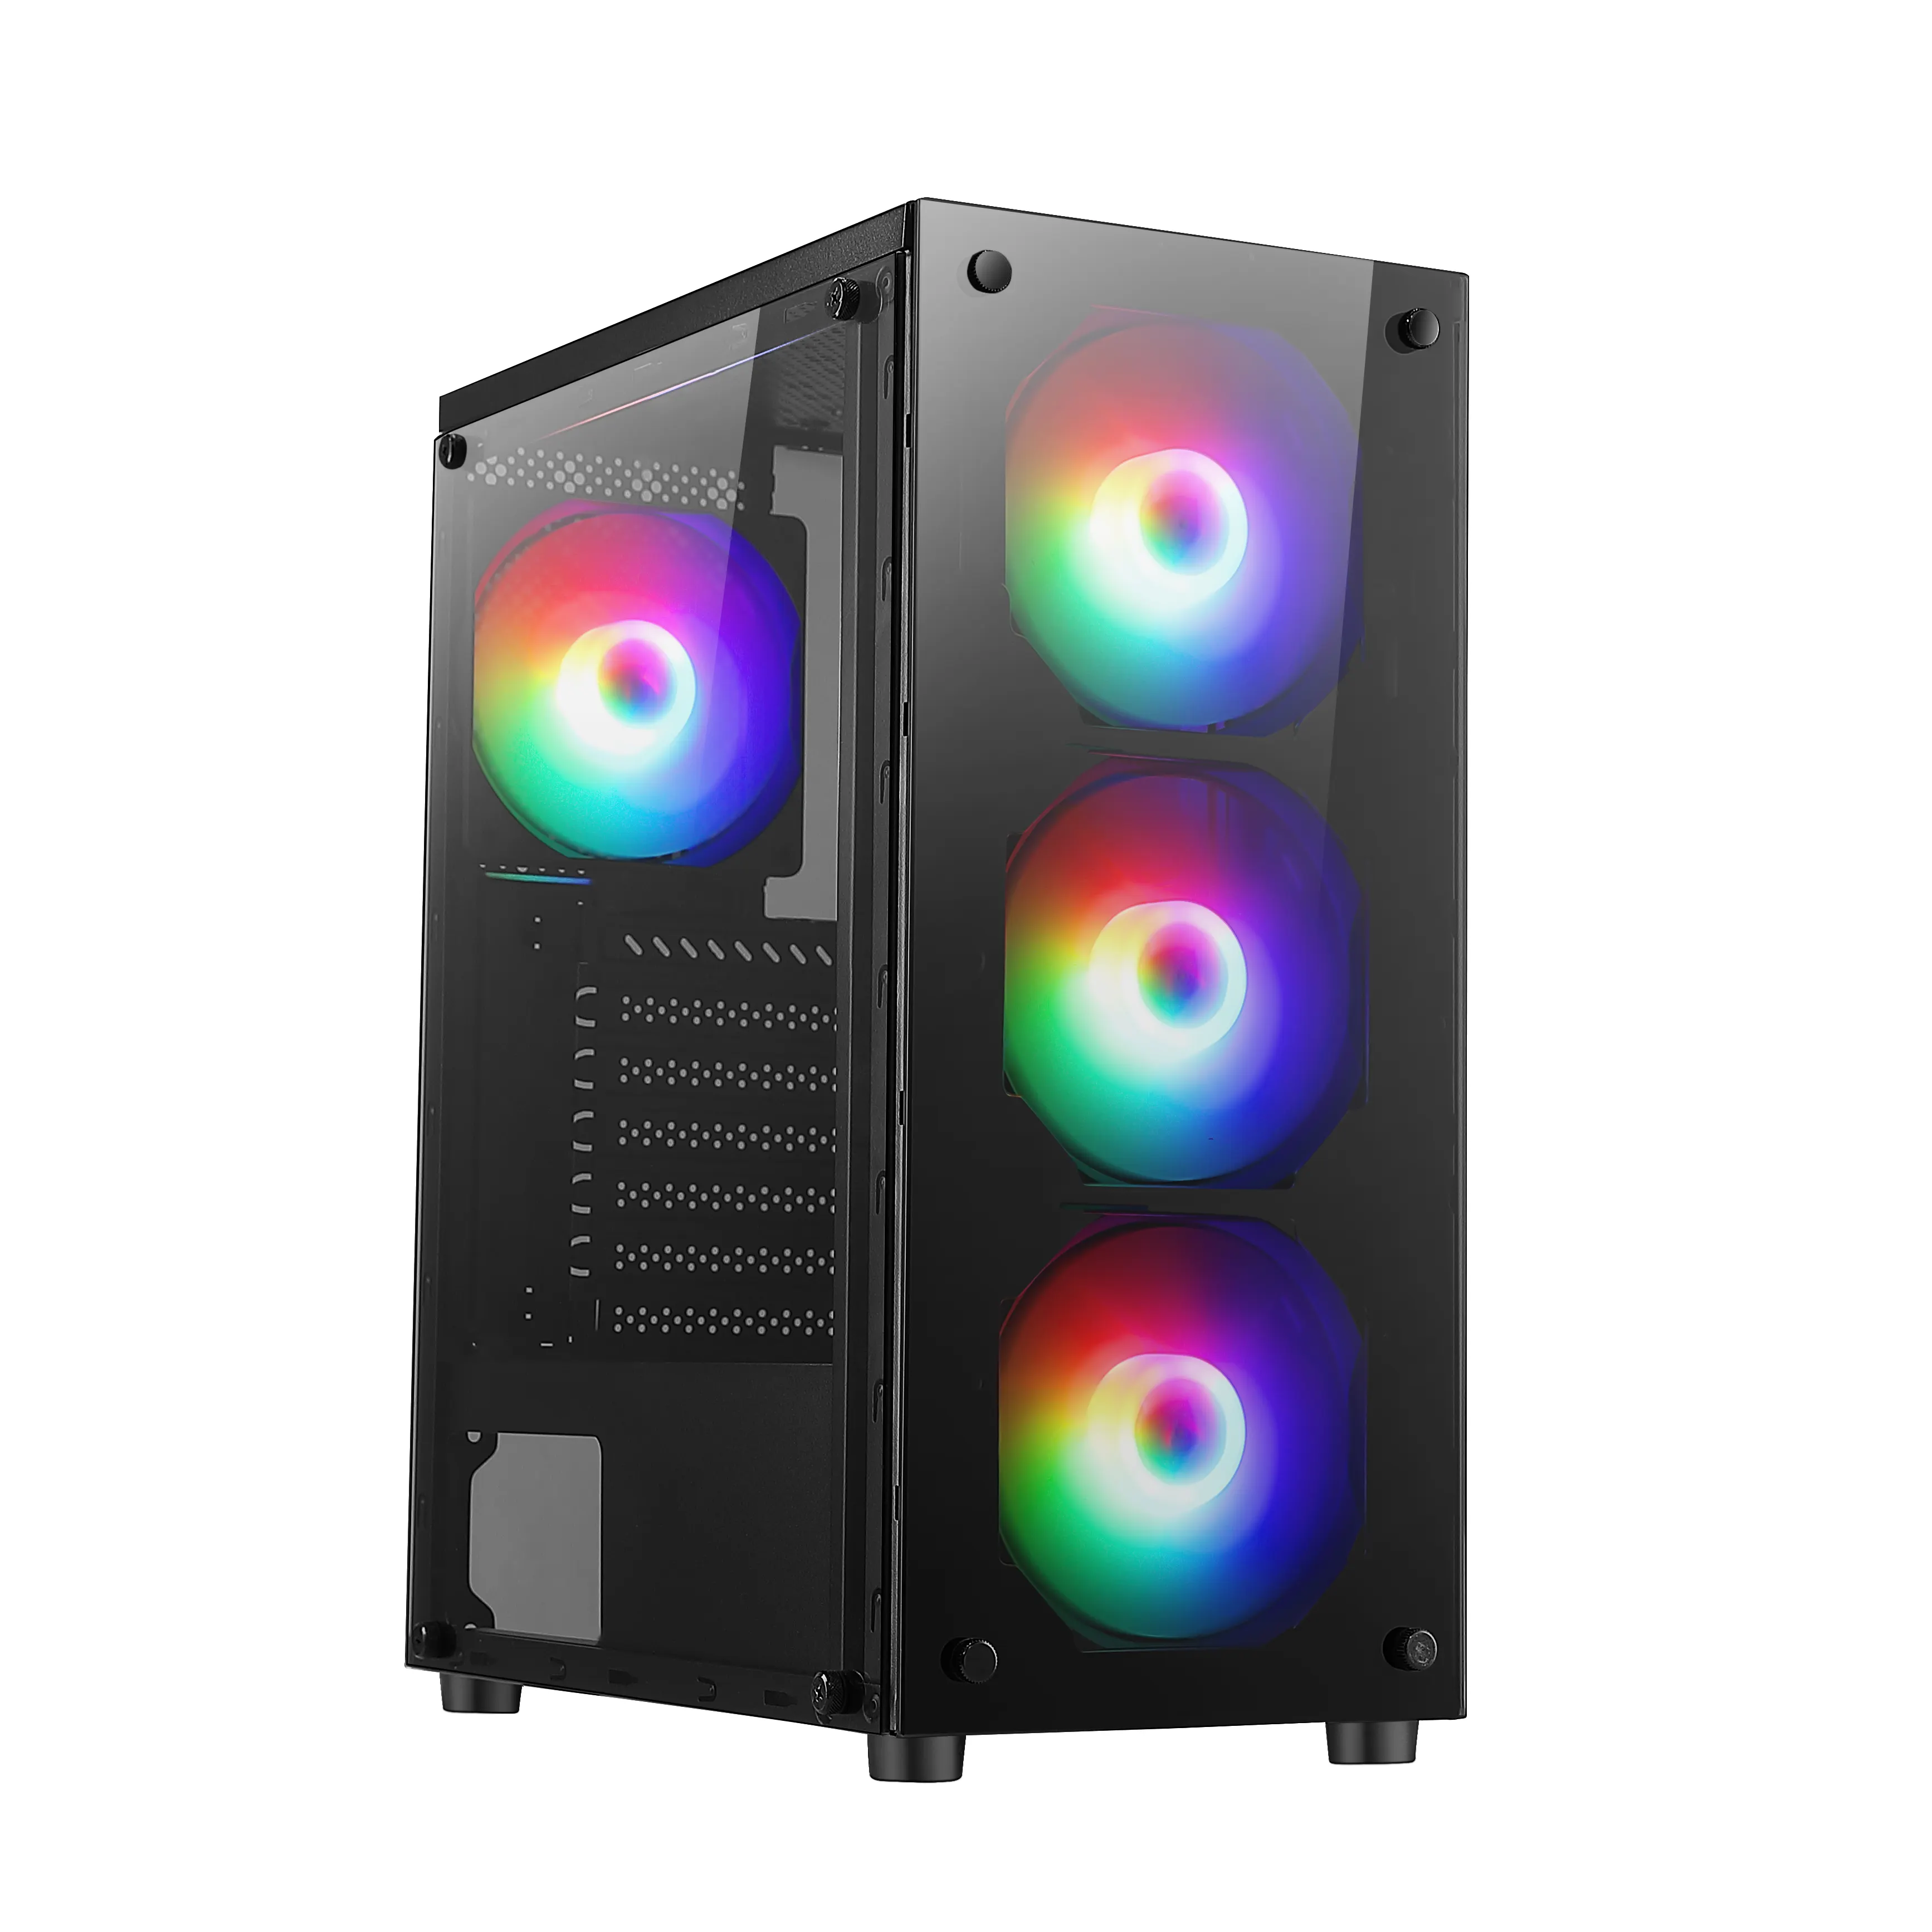 Newest Fashionable Computer Case Gaming Pc High Quality Full Mid Tower Desktop Gaming PC RGB Lighting